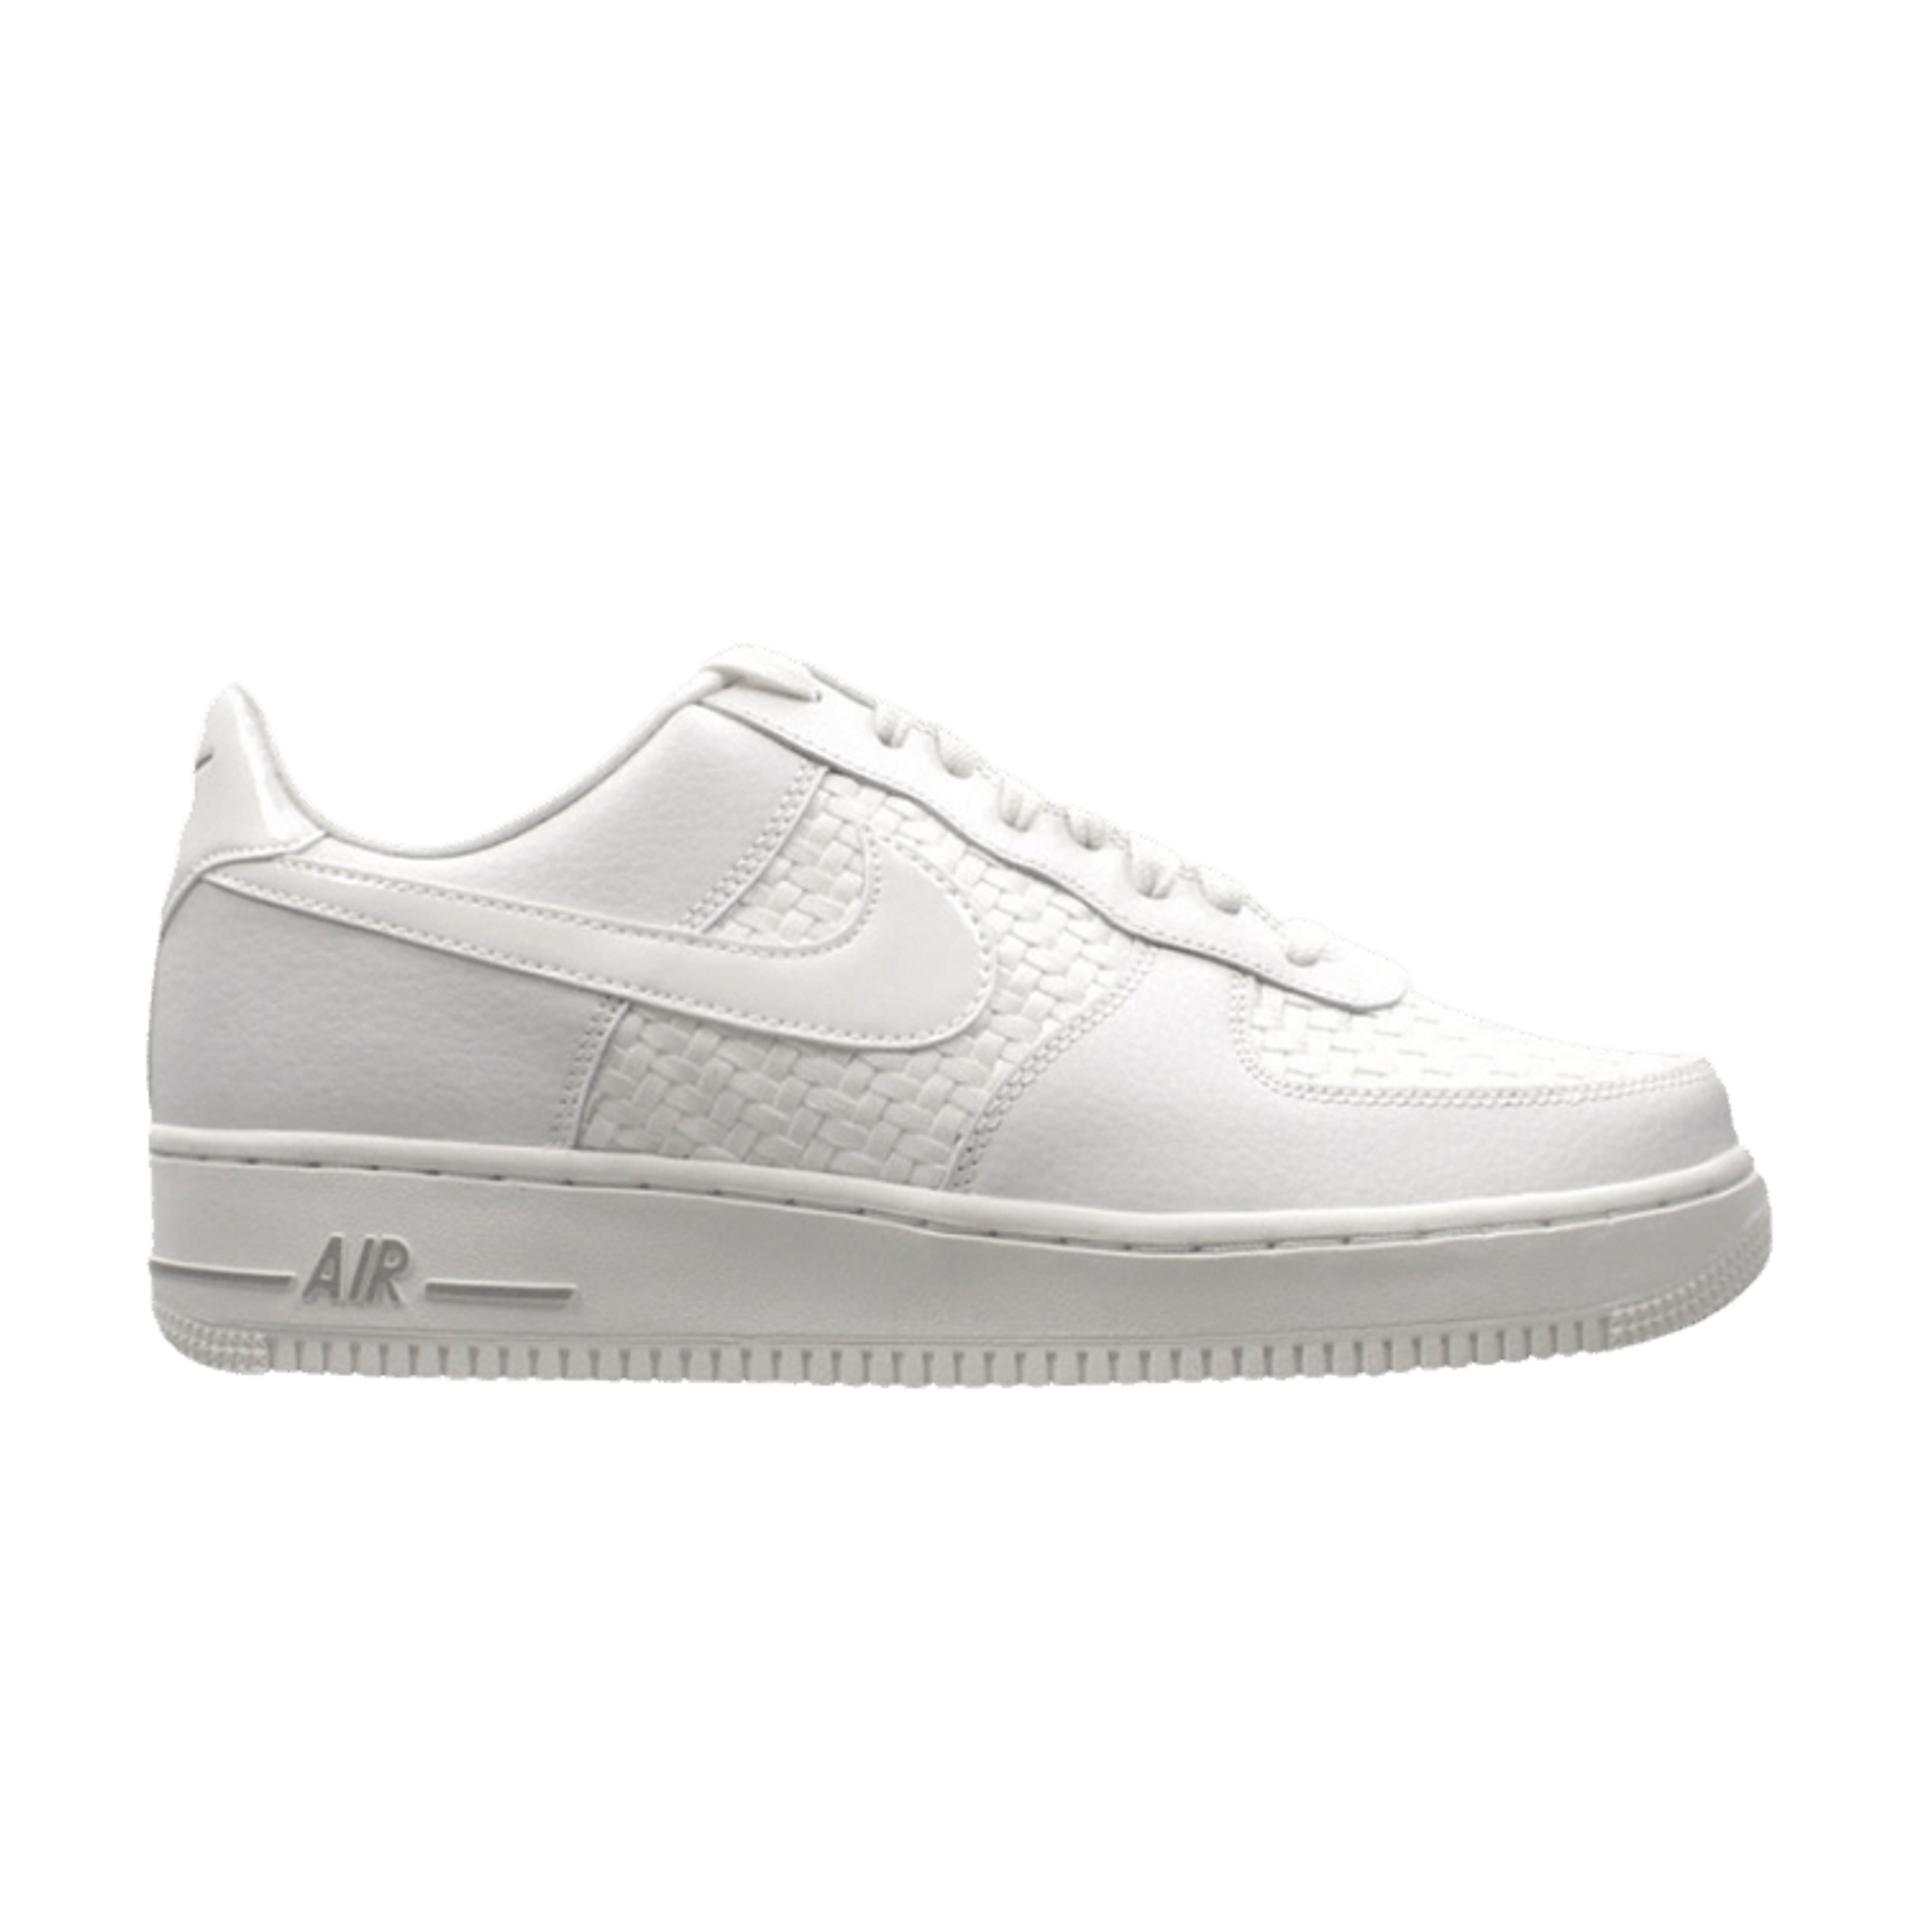 Nike Air Force 1 Low '07 LV8 'Summit White' - 718152 105 | Ox Street